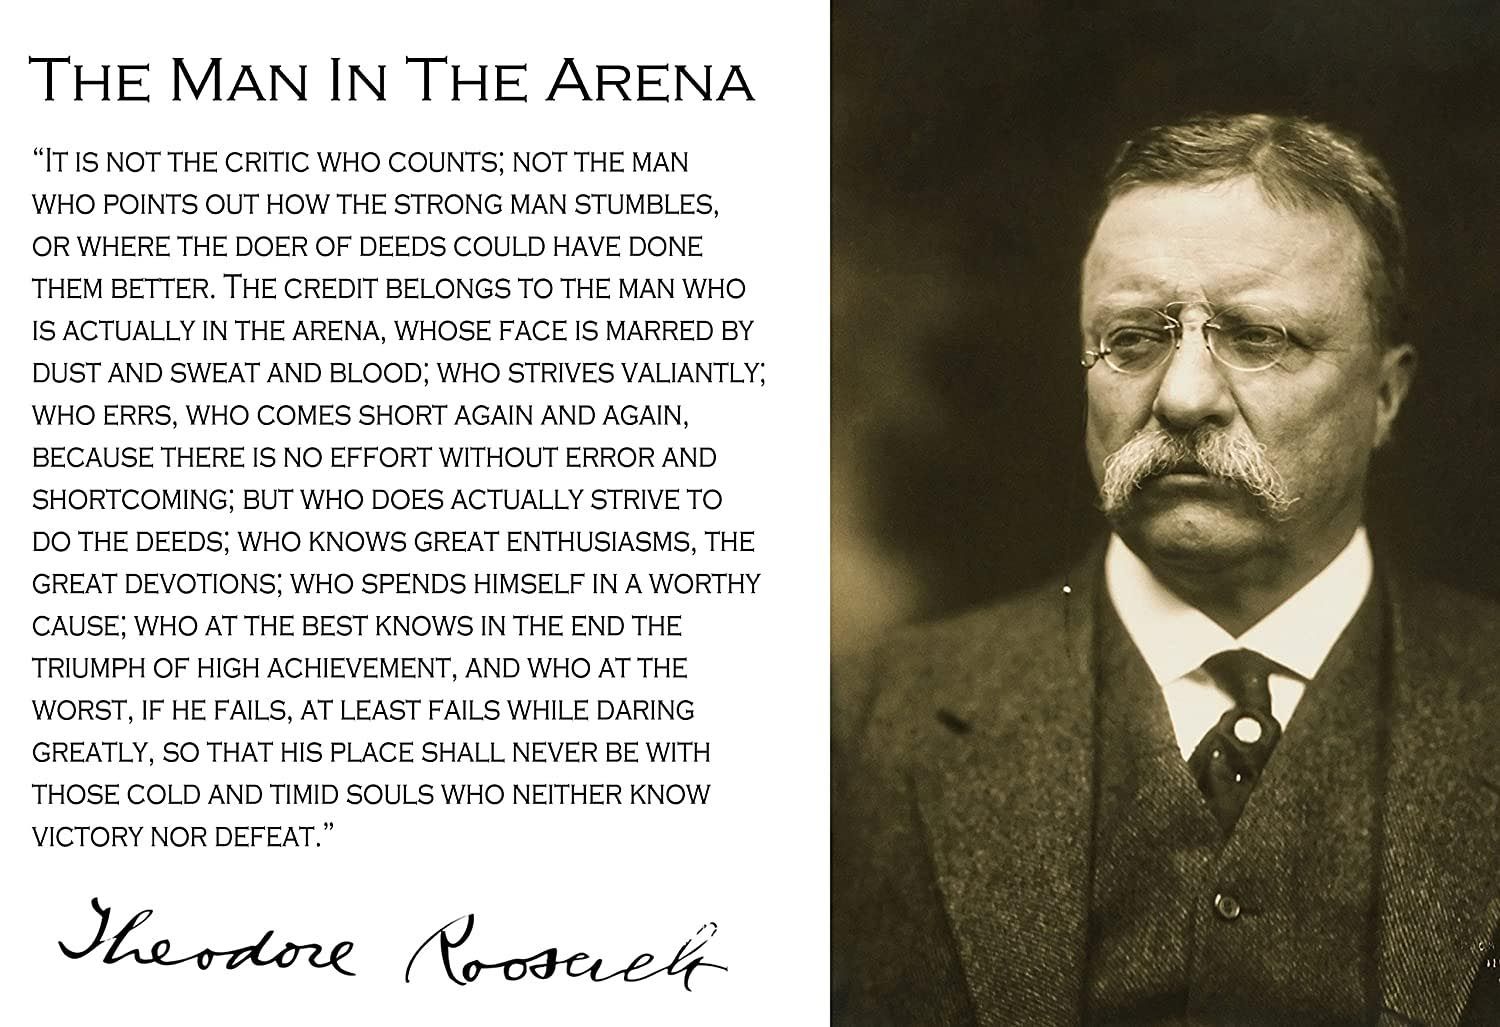 WISE WODS: Reflecting on some of Theodore Roosevelt’s words may help to silence the critics and the bulliesR